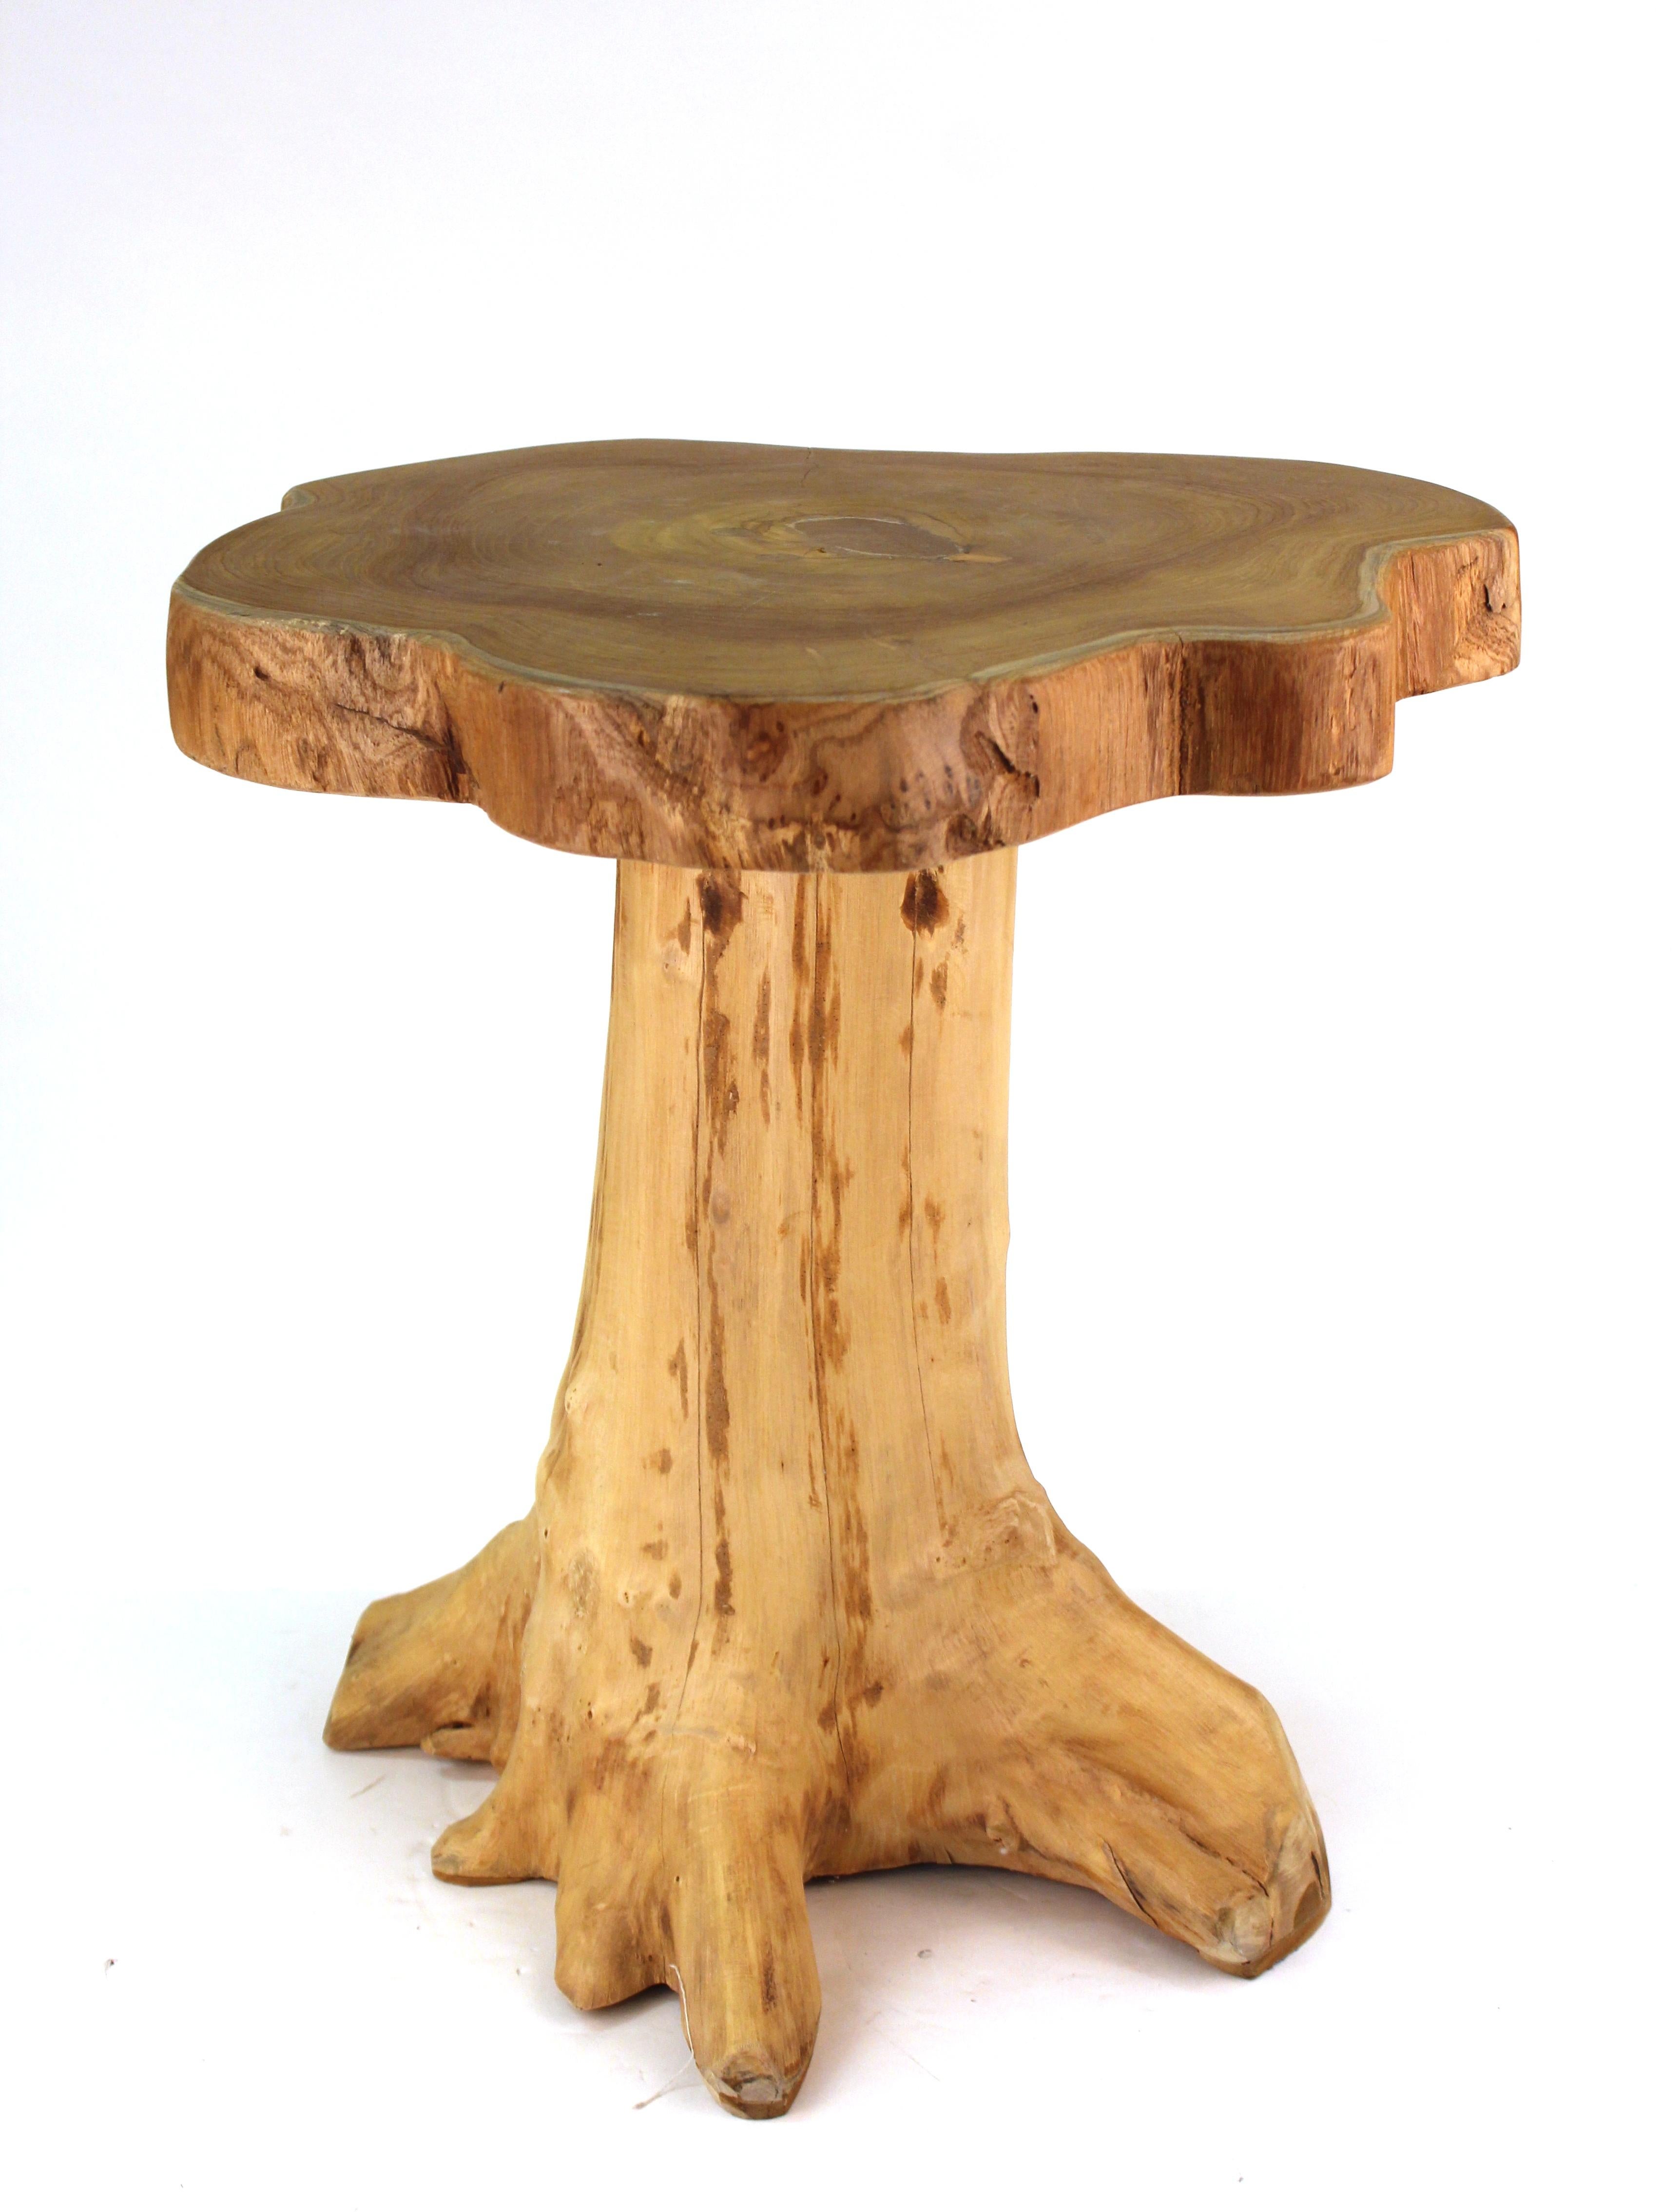 Modern style natural wood tree trunk side table or end table, made in Indonesia. The piece is marked on the bottom 'Made in Indonesia' and has a quality control label. In great vintage condition.